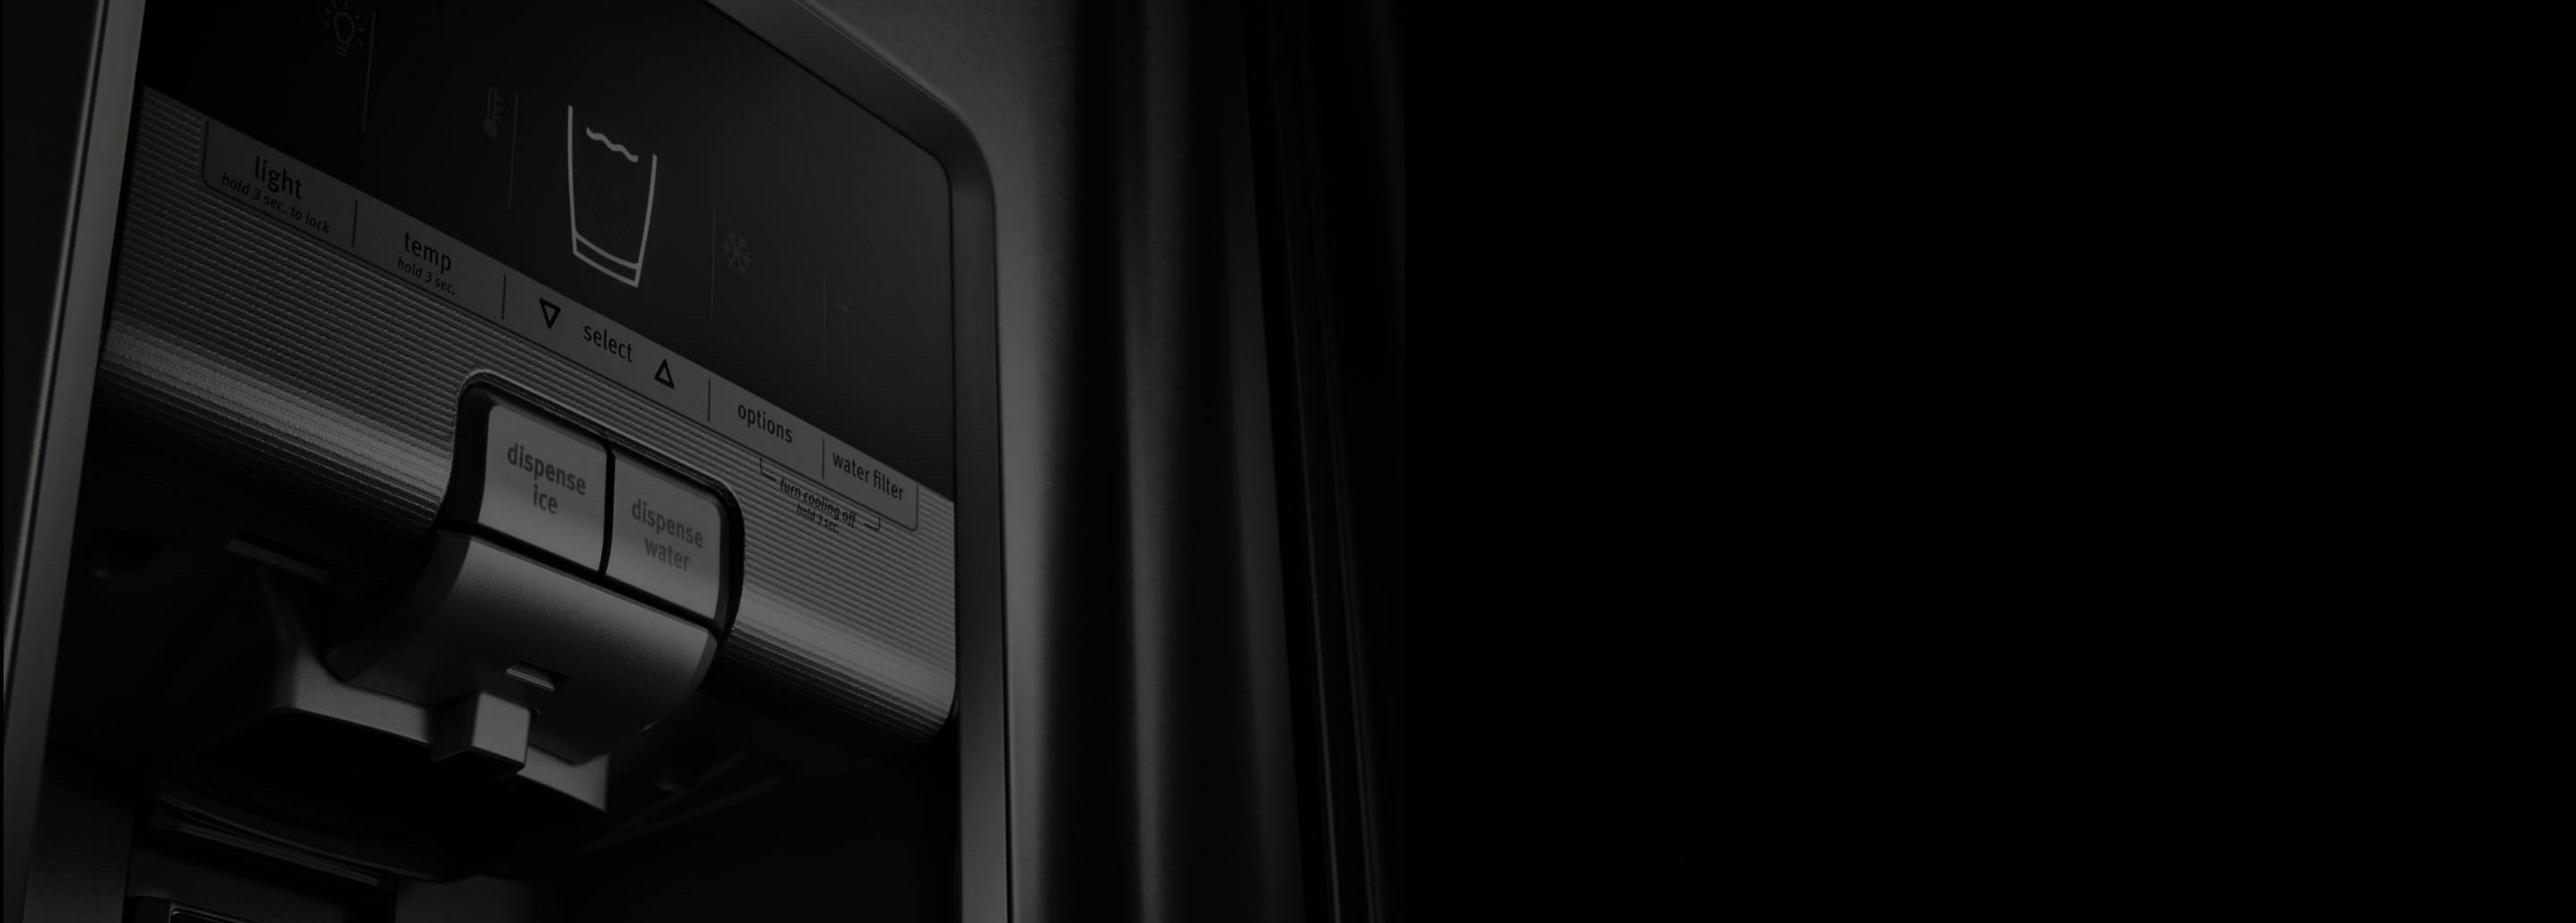 Dramatic, close-up shot of a black Maytag refrigerator ice and water dispenser.